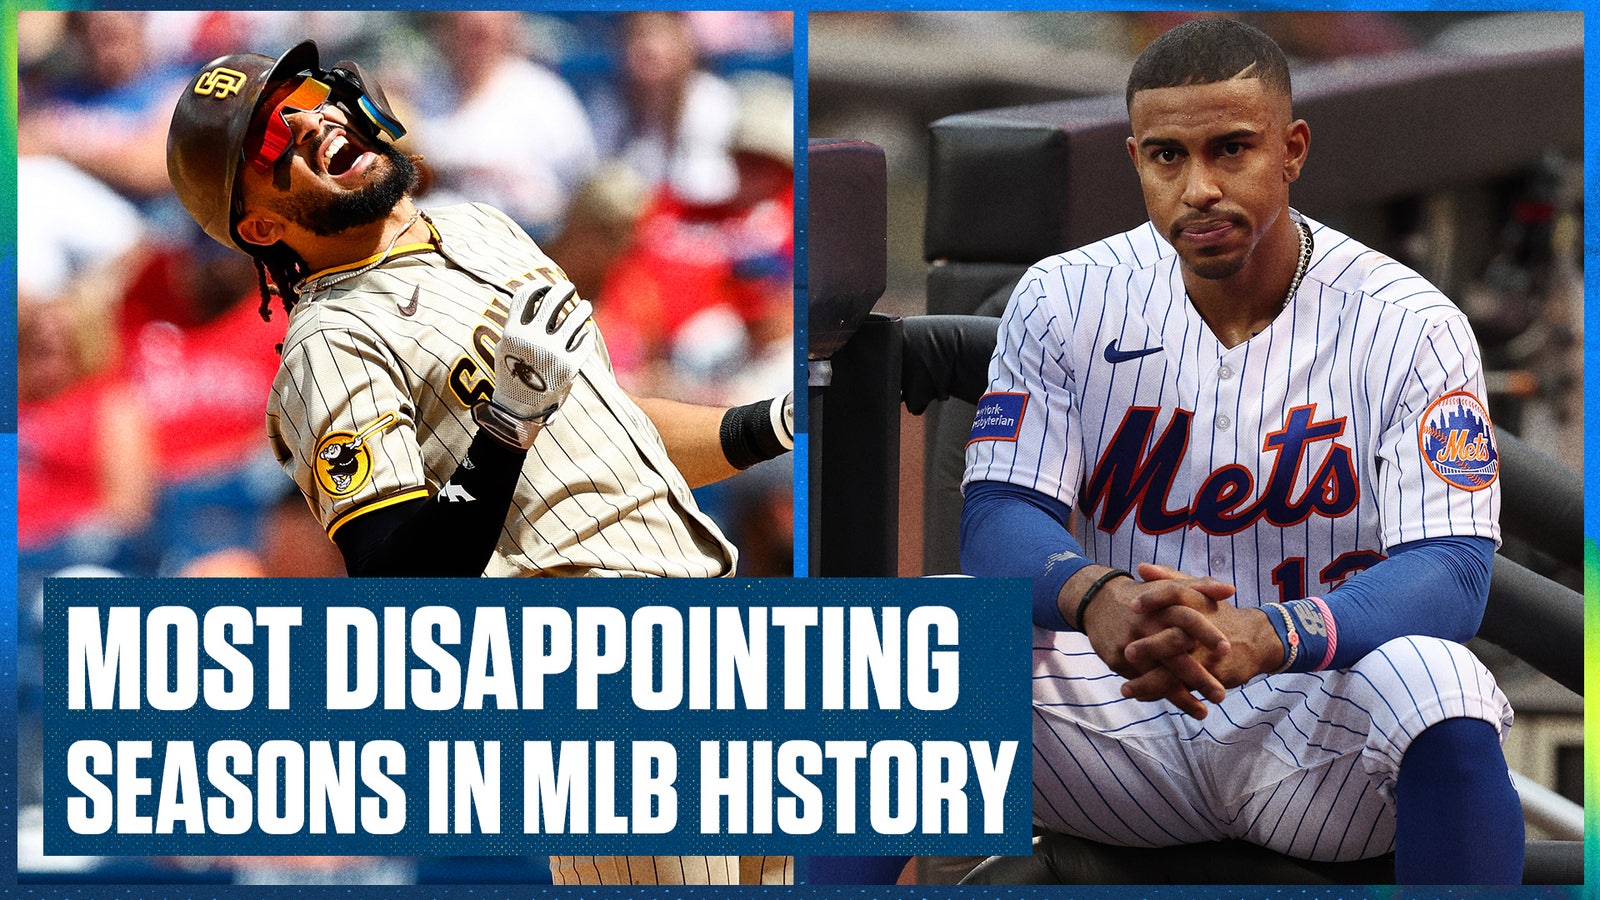 Padres, Mets have the two most disappointing seasons in MLB history 